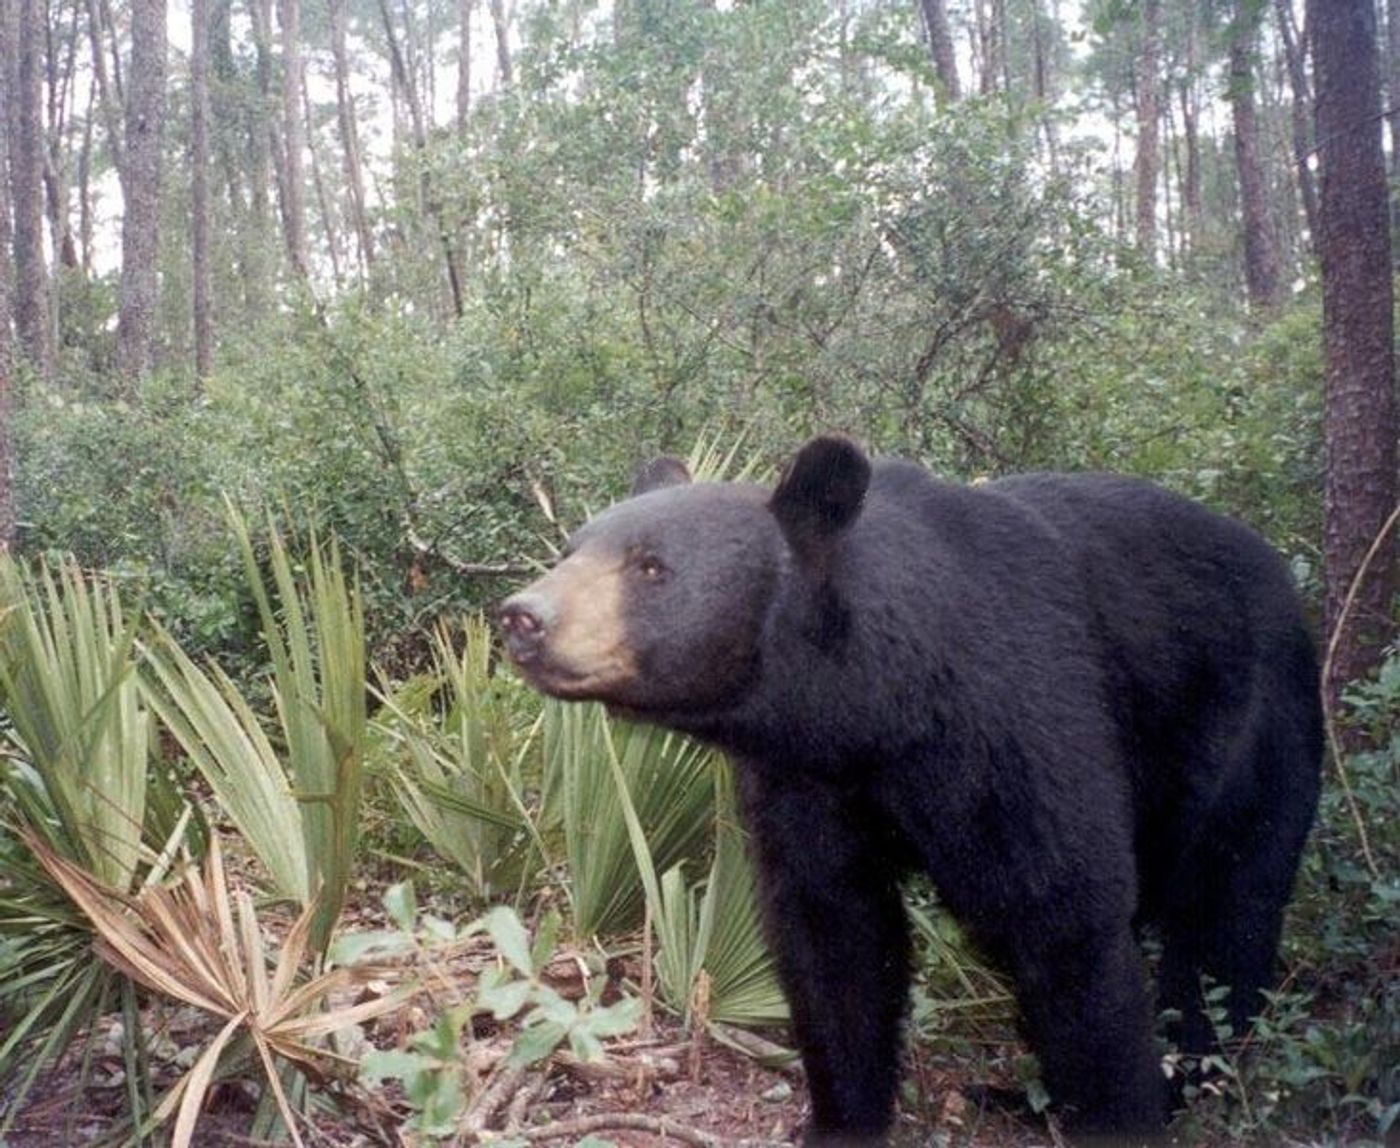 Drones were found to dramatically increase the heart rates of bears